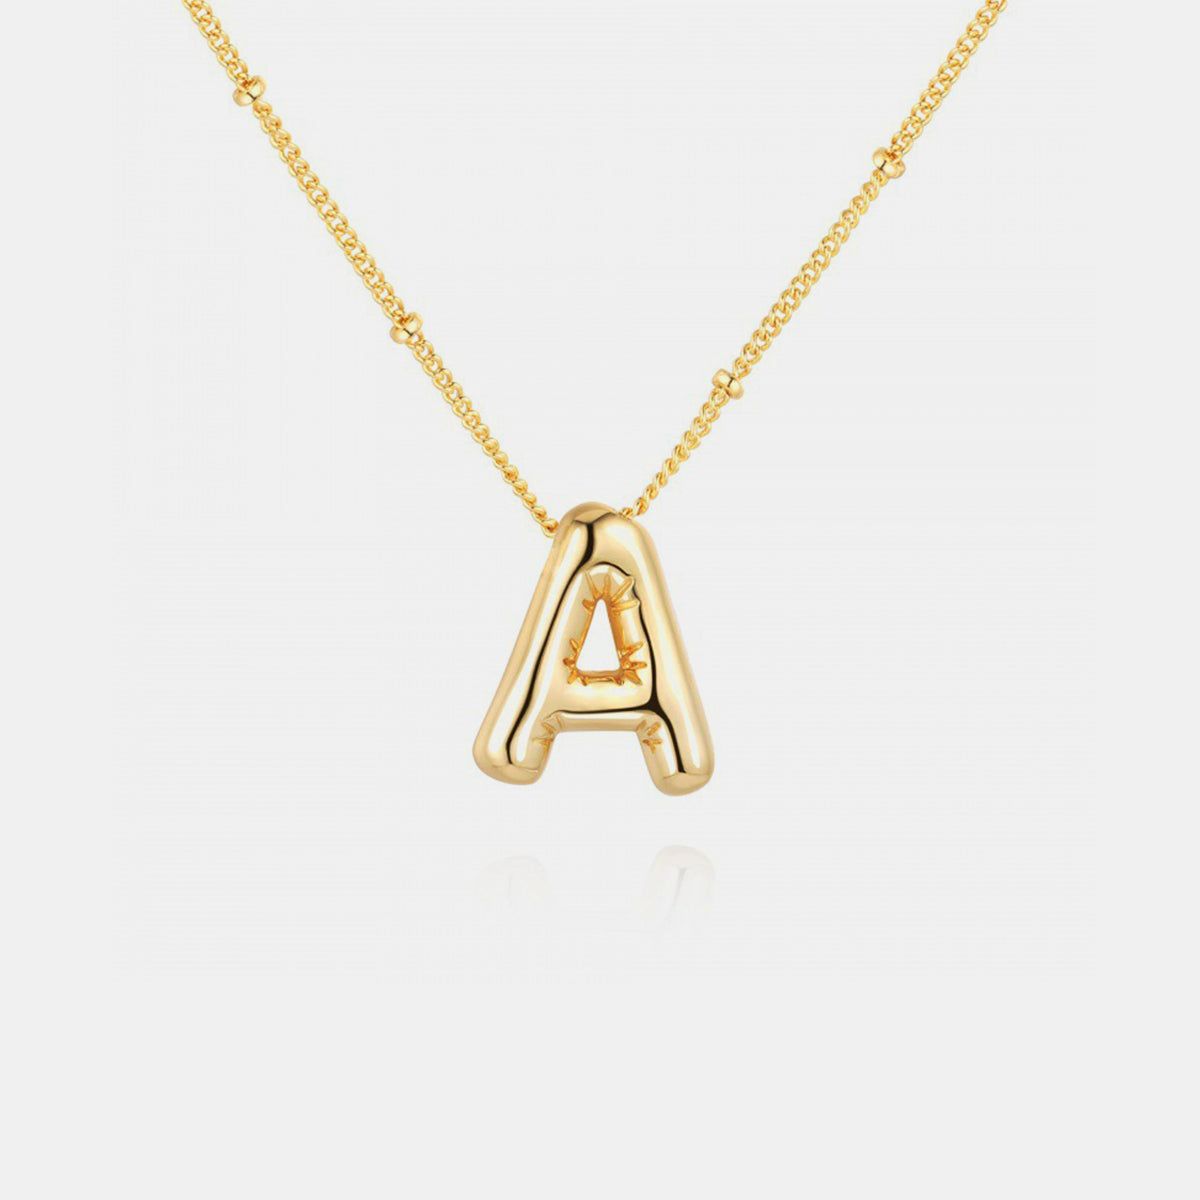 Gold-Plated Letter Pendant Necklace  TEEK Trend Style A One Size 